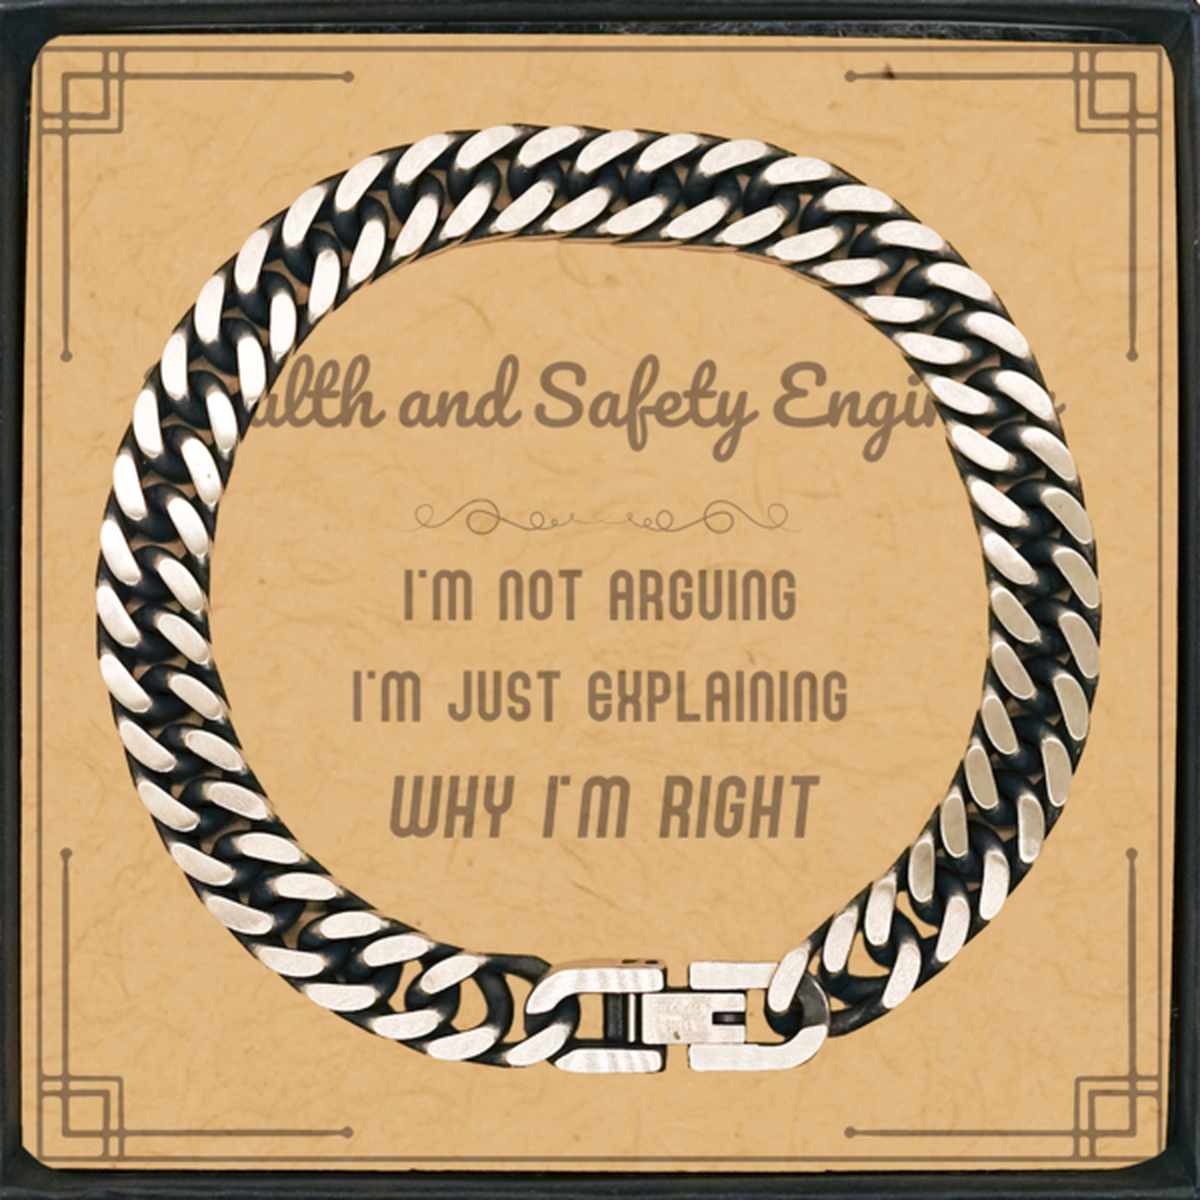 Health and Safety Engineer I'm not Arguing. I'm Just Explaining Why I'm RIGHT Cuban Link Chain Bracelet, Funny Saying Quote Health and Safety Engineer Gifts For Health and Safety Engineer Message Card Graduation Birthday Christmas Gifts for Men Women Cowo